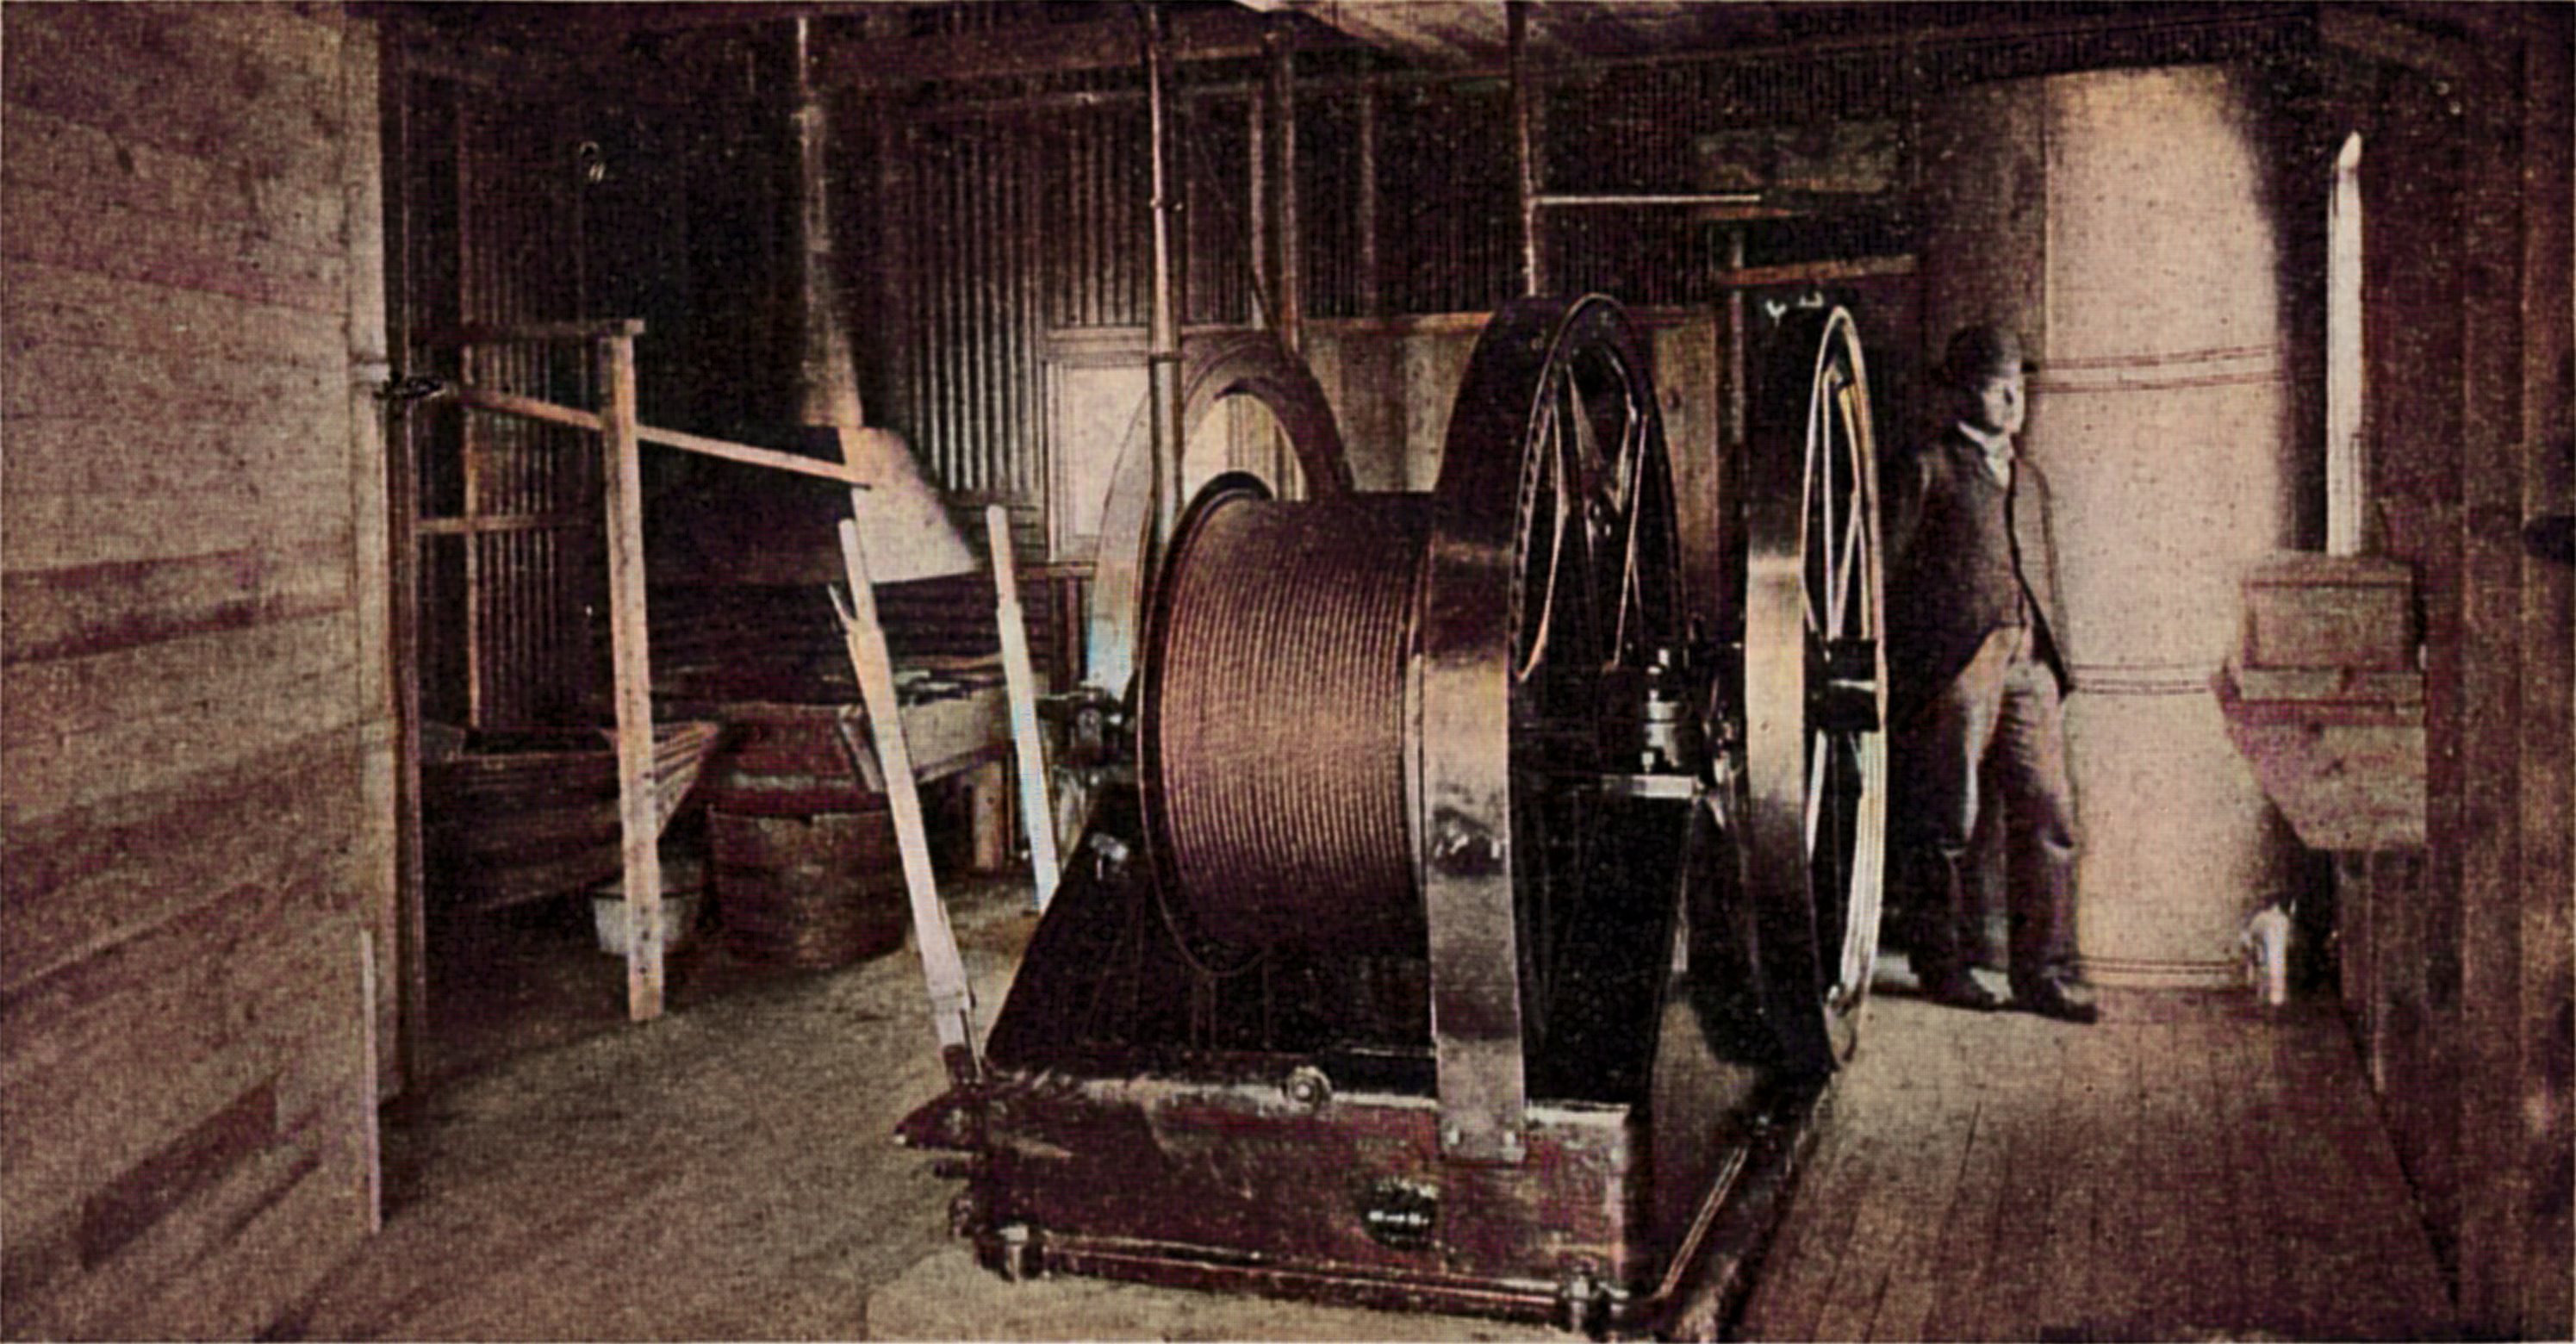 Engine Room of the Golconda Mine, Showing Forge, Storeroom and Front View of Hoisting Engine.